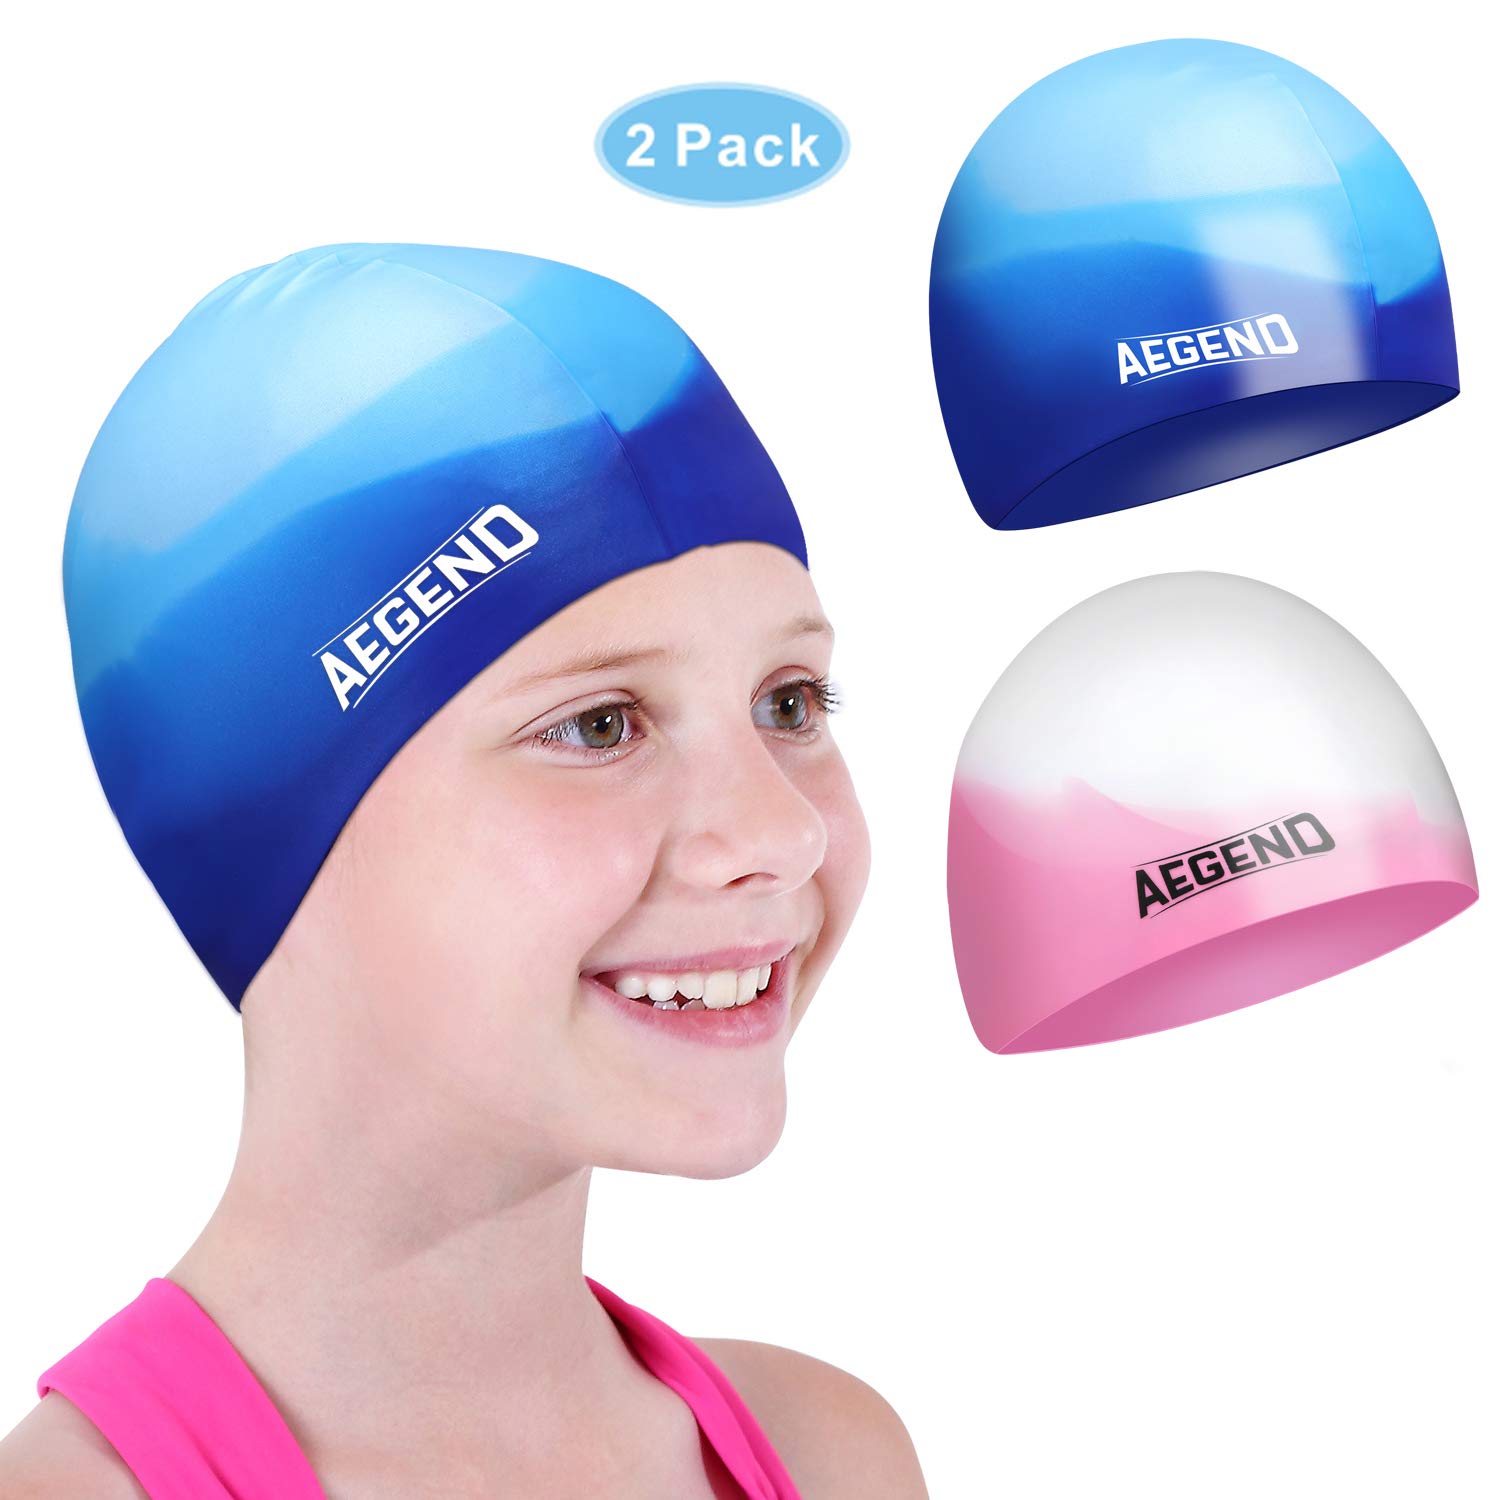 egend 2 Pack Swim Cap for (Age 3-12), Durable Silicone Swimming Cap for Kids Youths, Comfortable Fit for Long Hair and Short Hair, 3 Colors